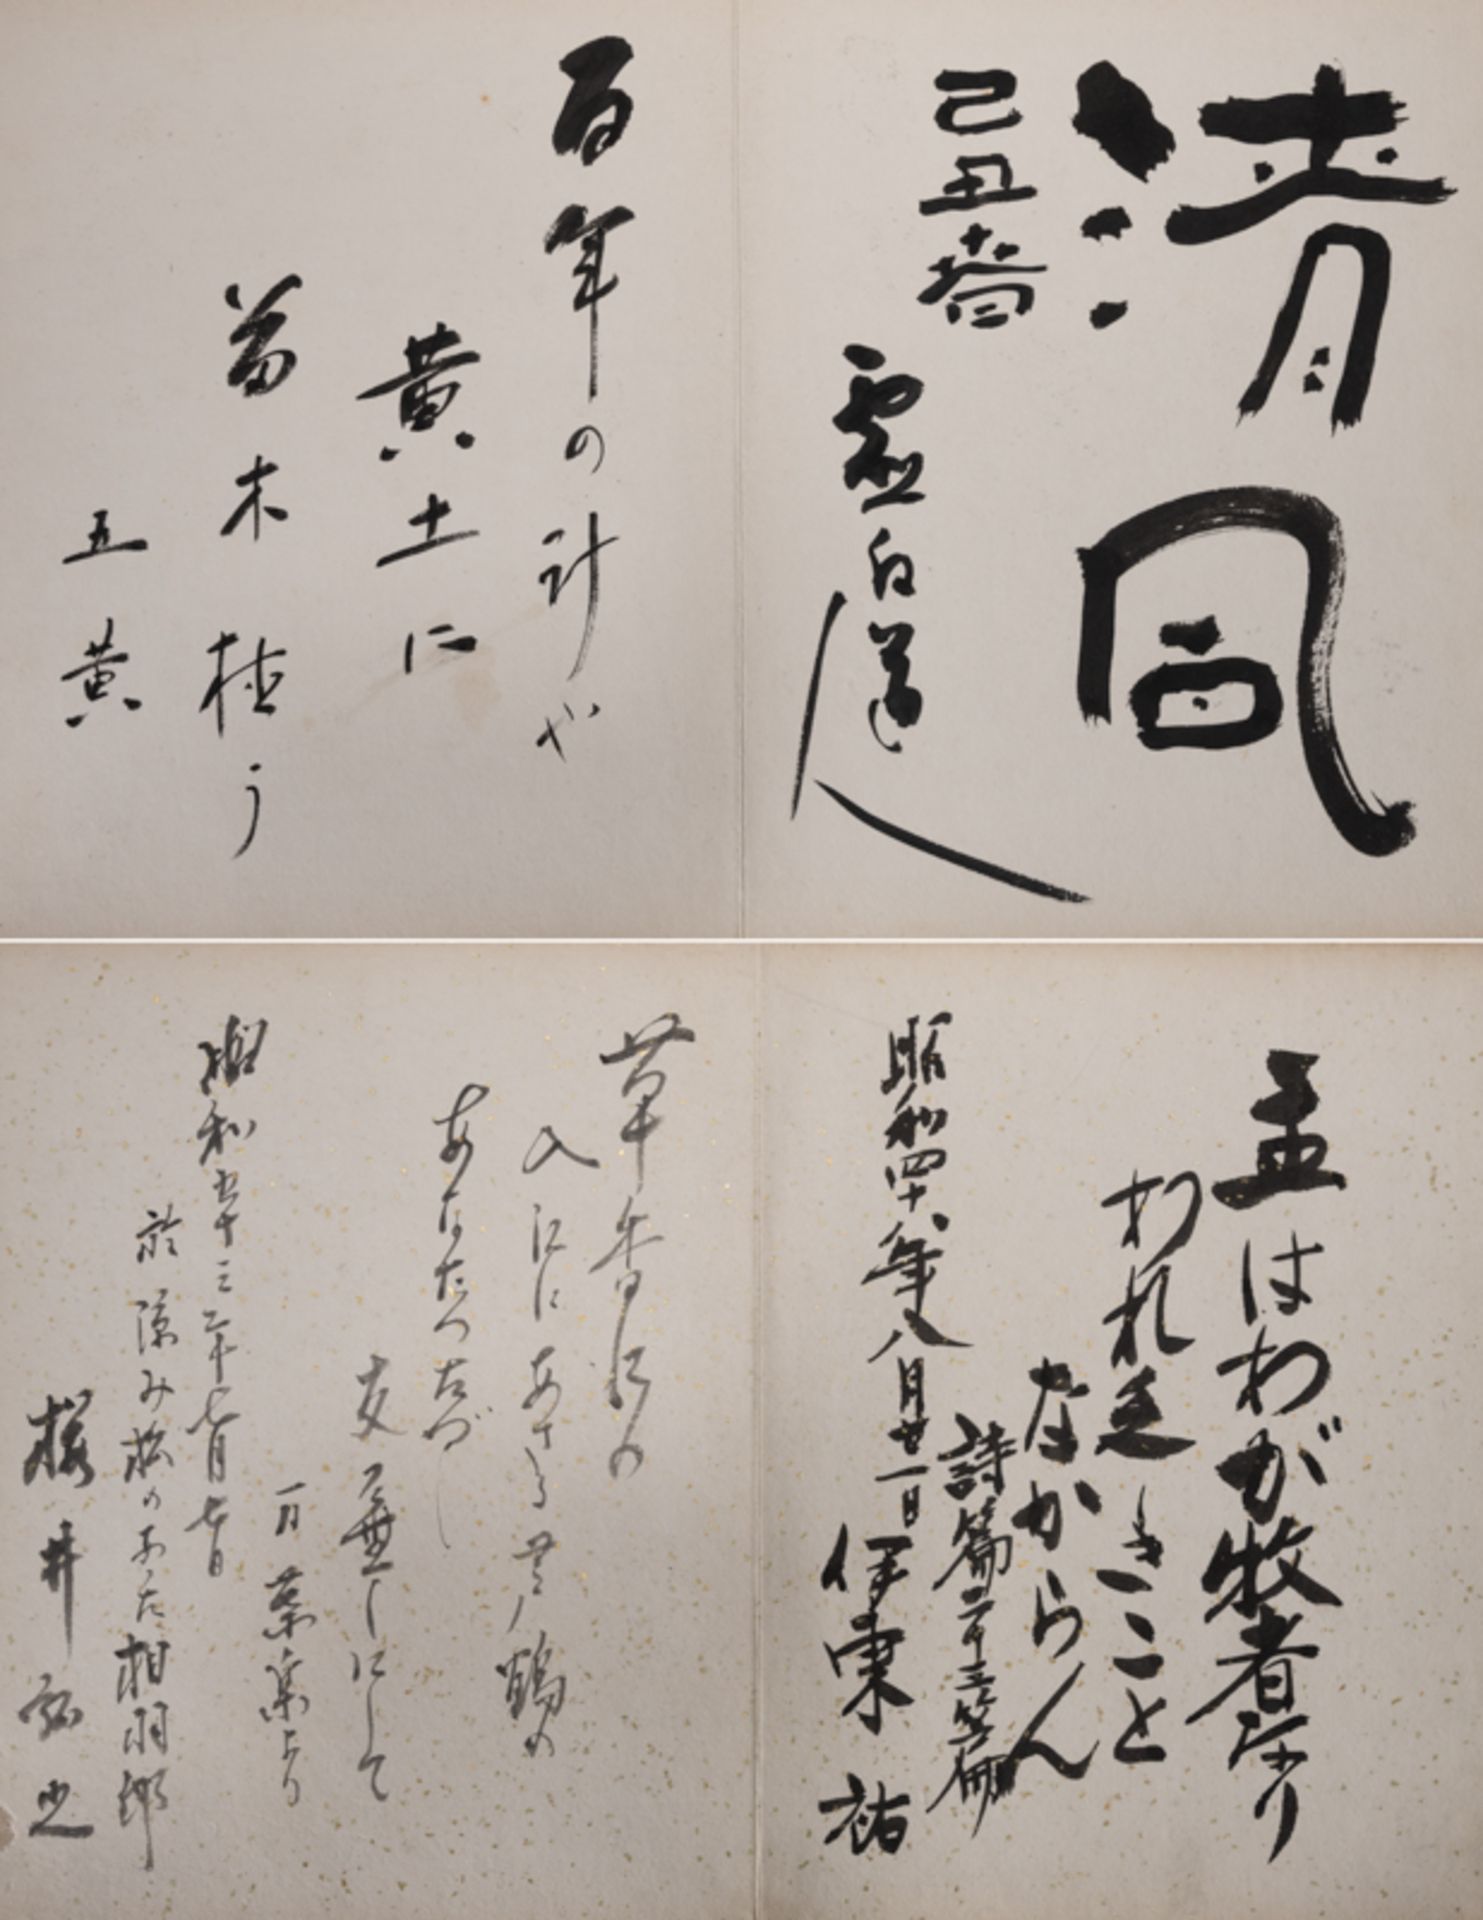 A BOOK OF CALLIGRAPHIES FROM SOME EAST ASIAN CELEBRITIES 東亞名人題字紀念冊頁 - Image 13 of 16